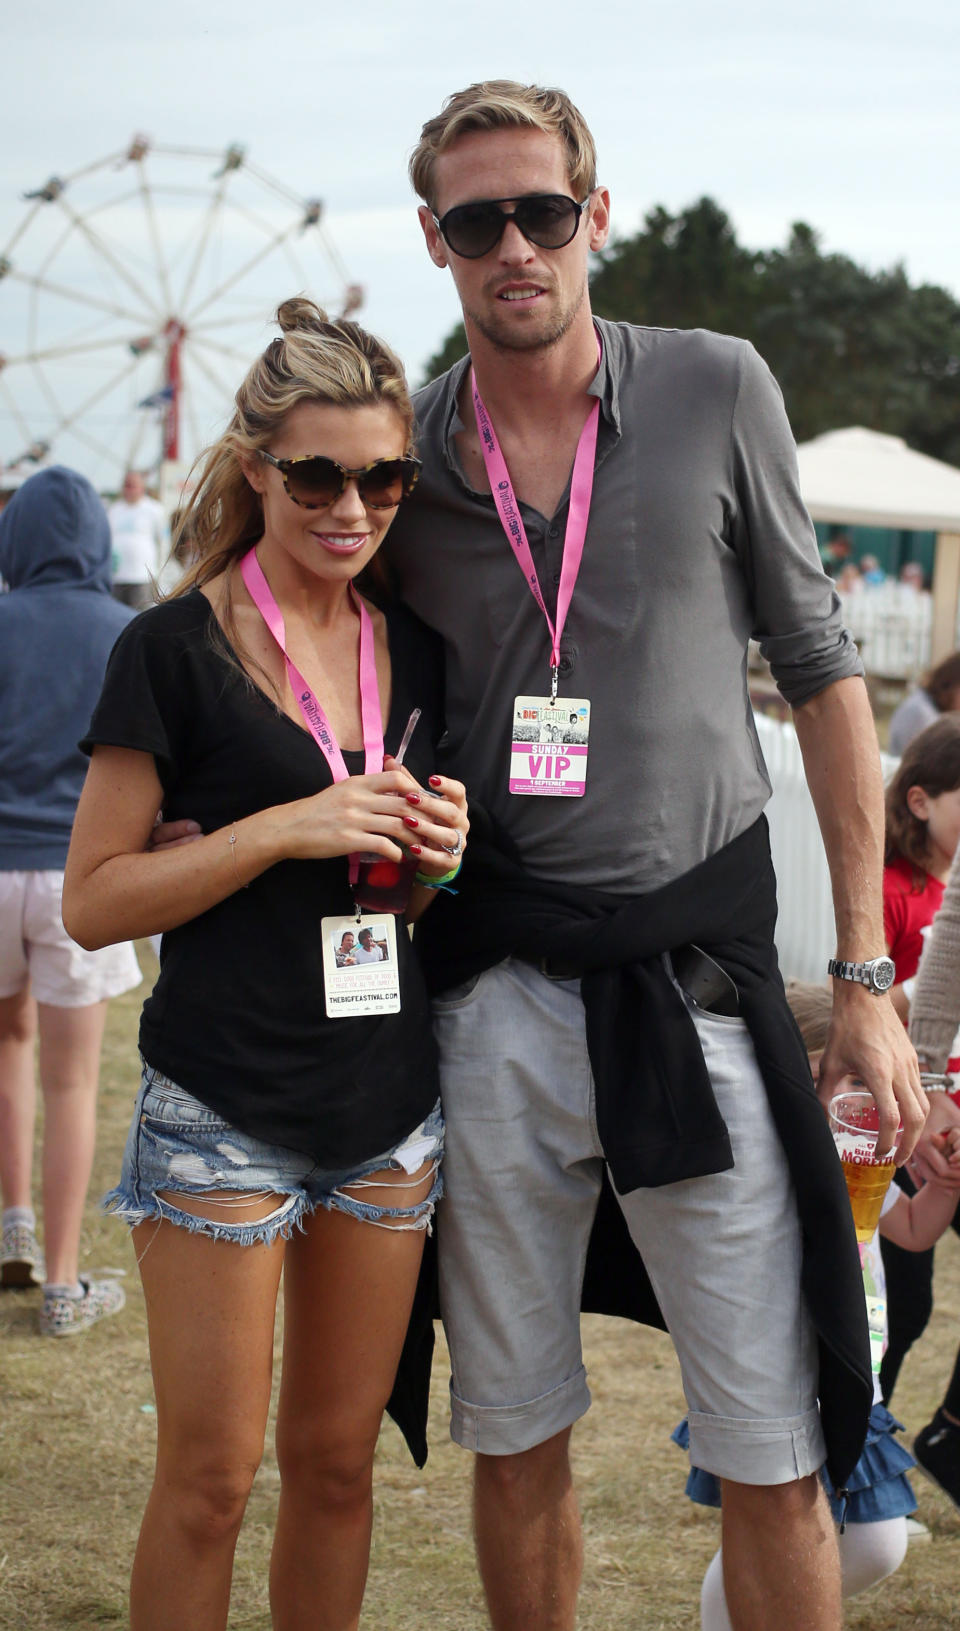 Abbey Clancy and Peter Crouch enjoy the Big Feastival, organised by Alex James and Jamie Oliver at Alex James' farm in Kingham, Oxfordshire.